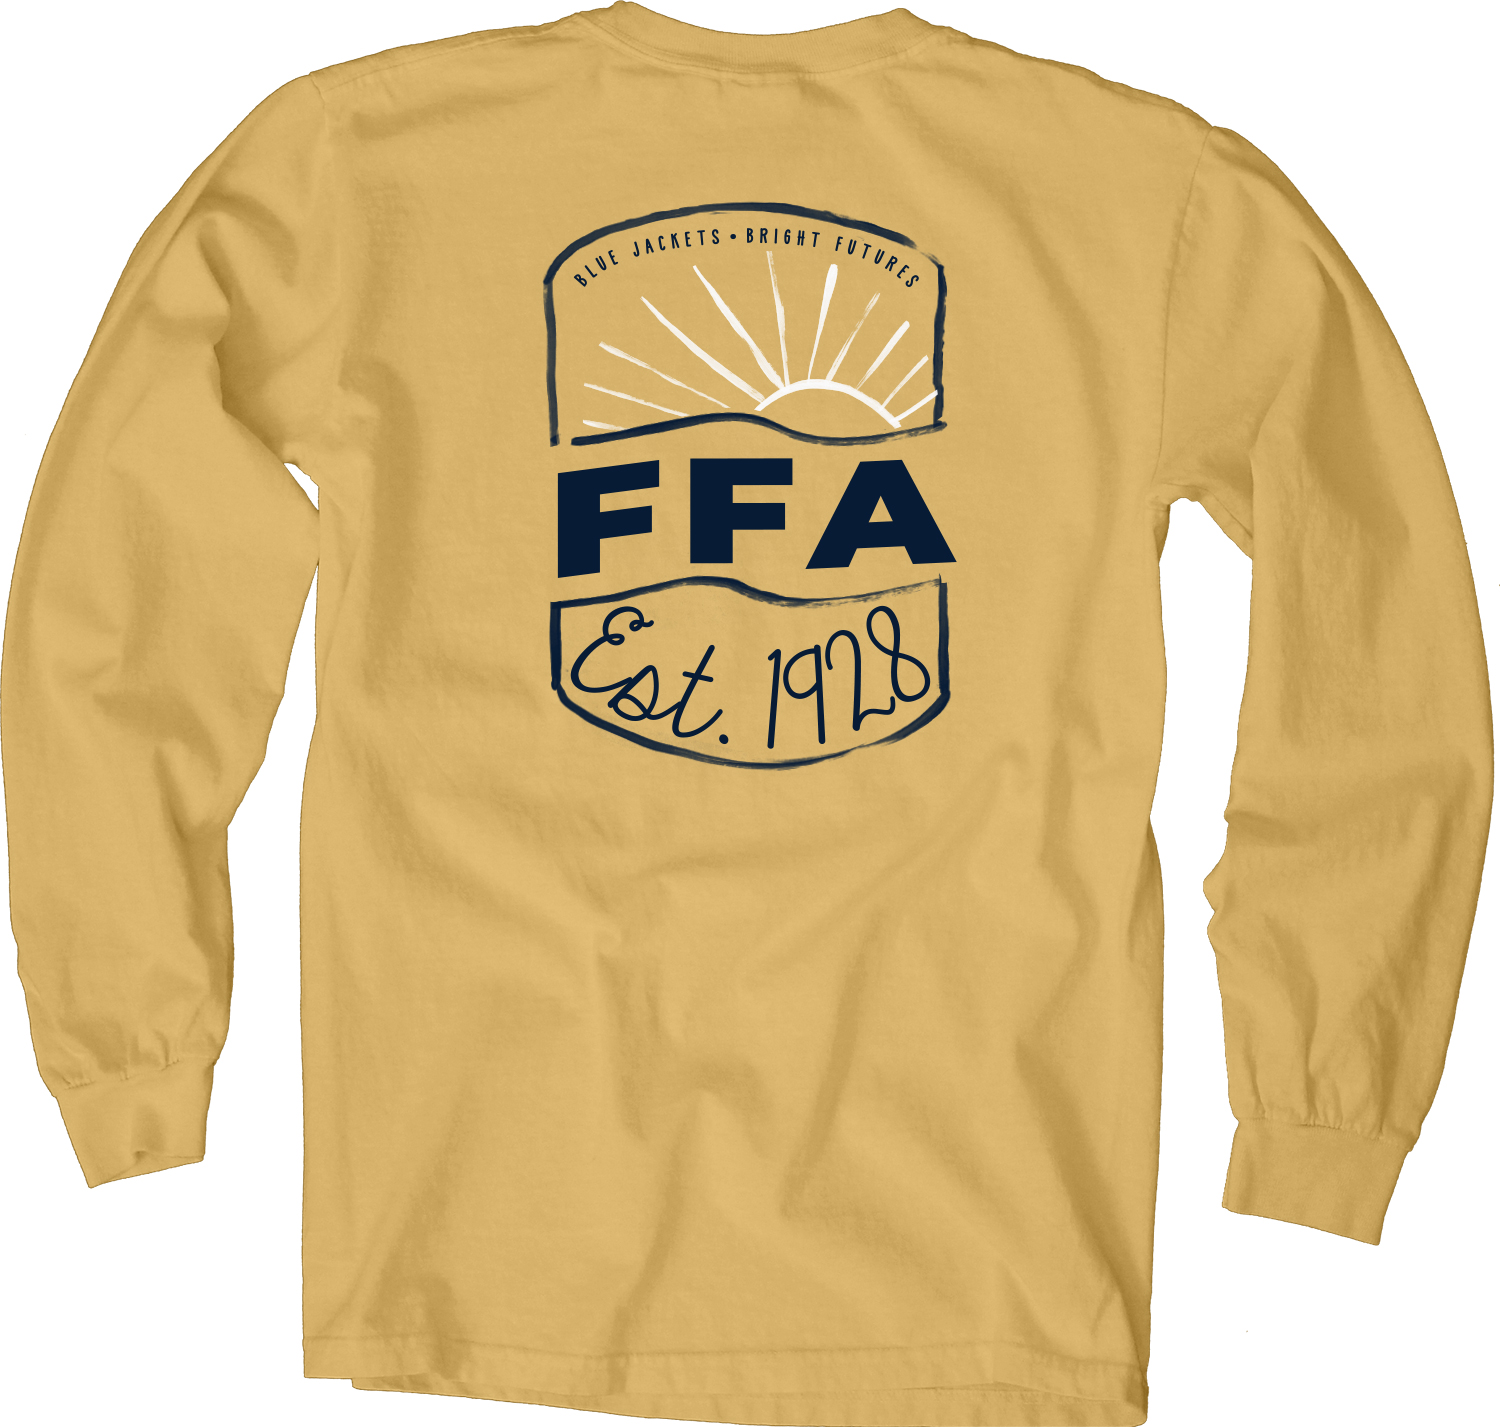 National FFA on X: Awesome winning shirt design by @ArkansasFFA's Mountain  View FFA chapter. Order yours today!    / X